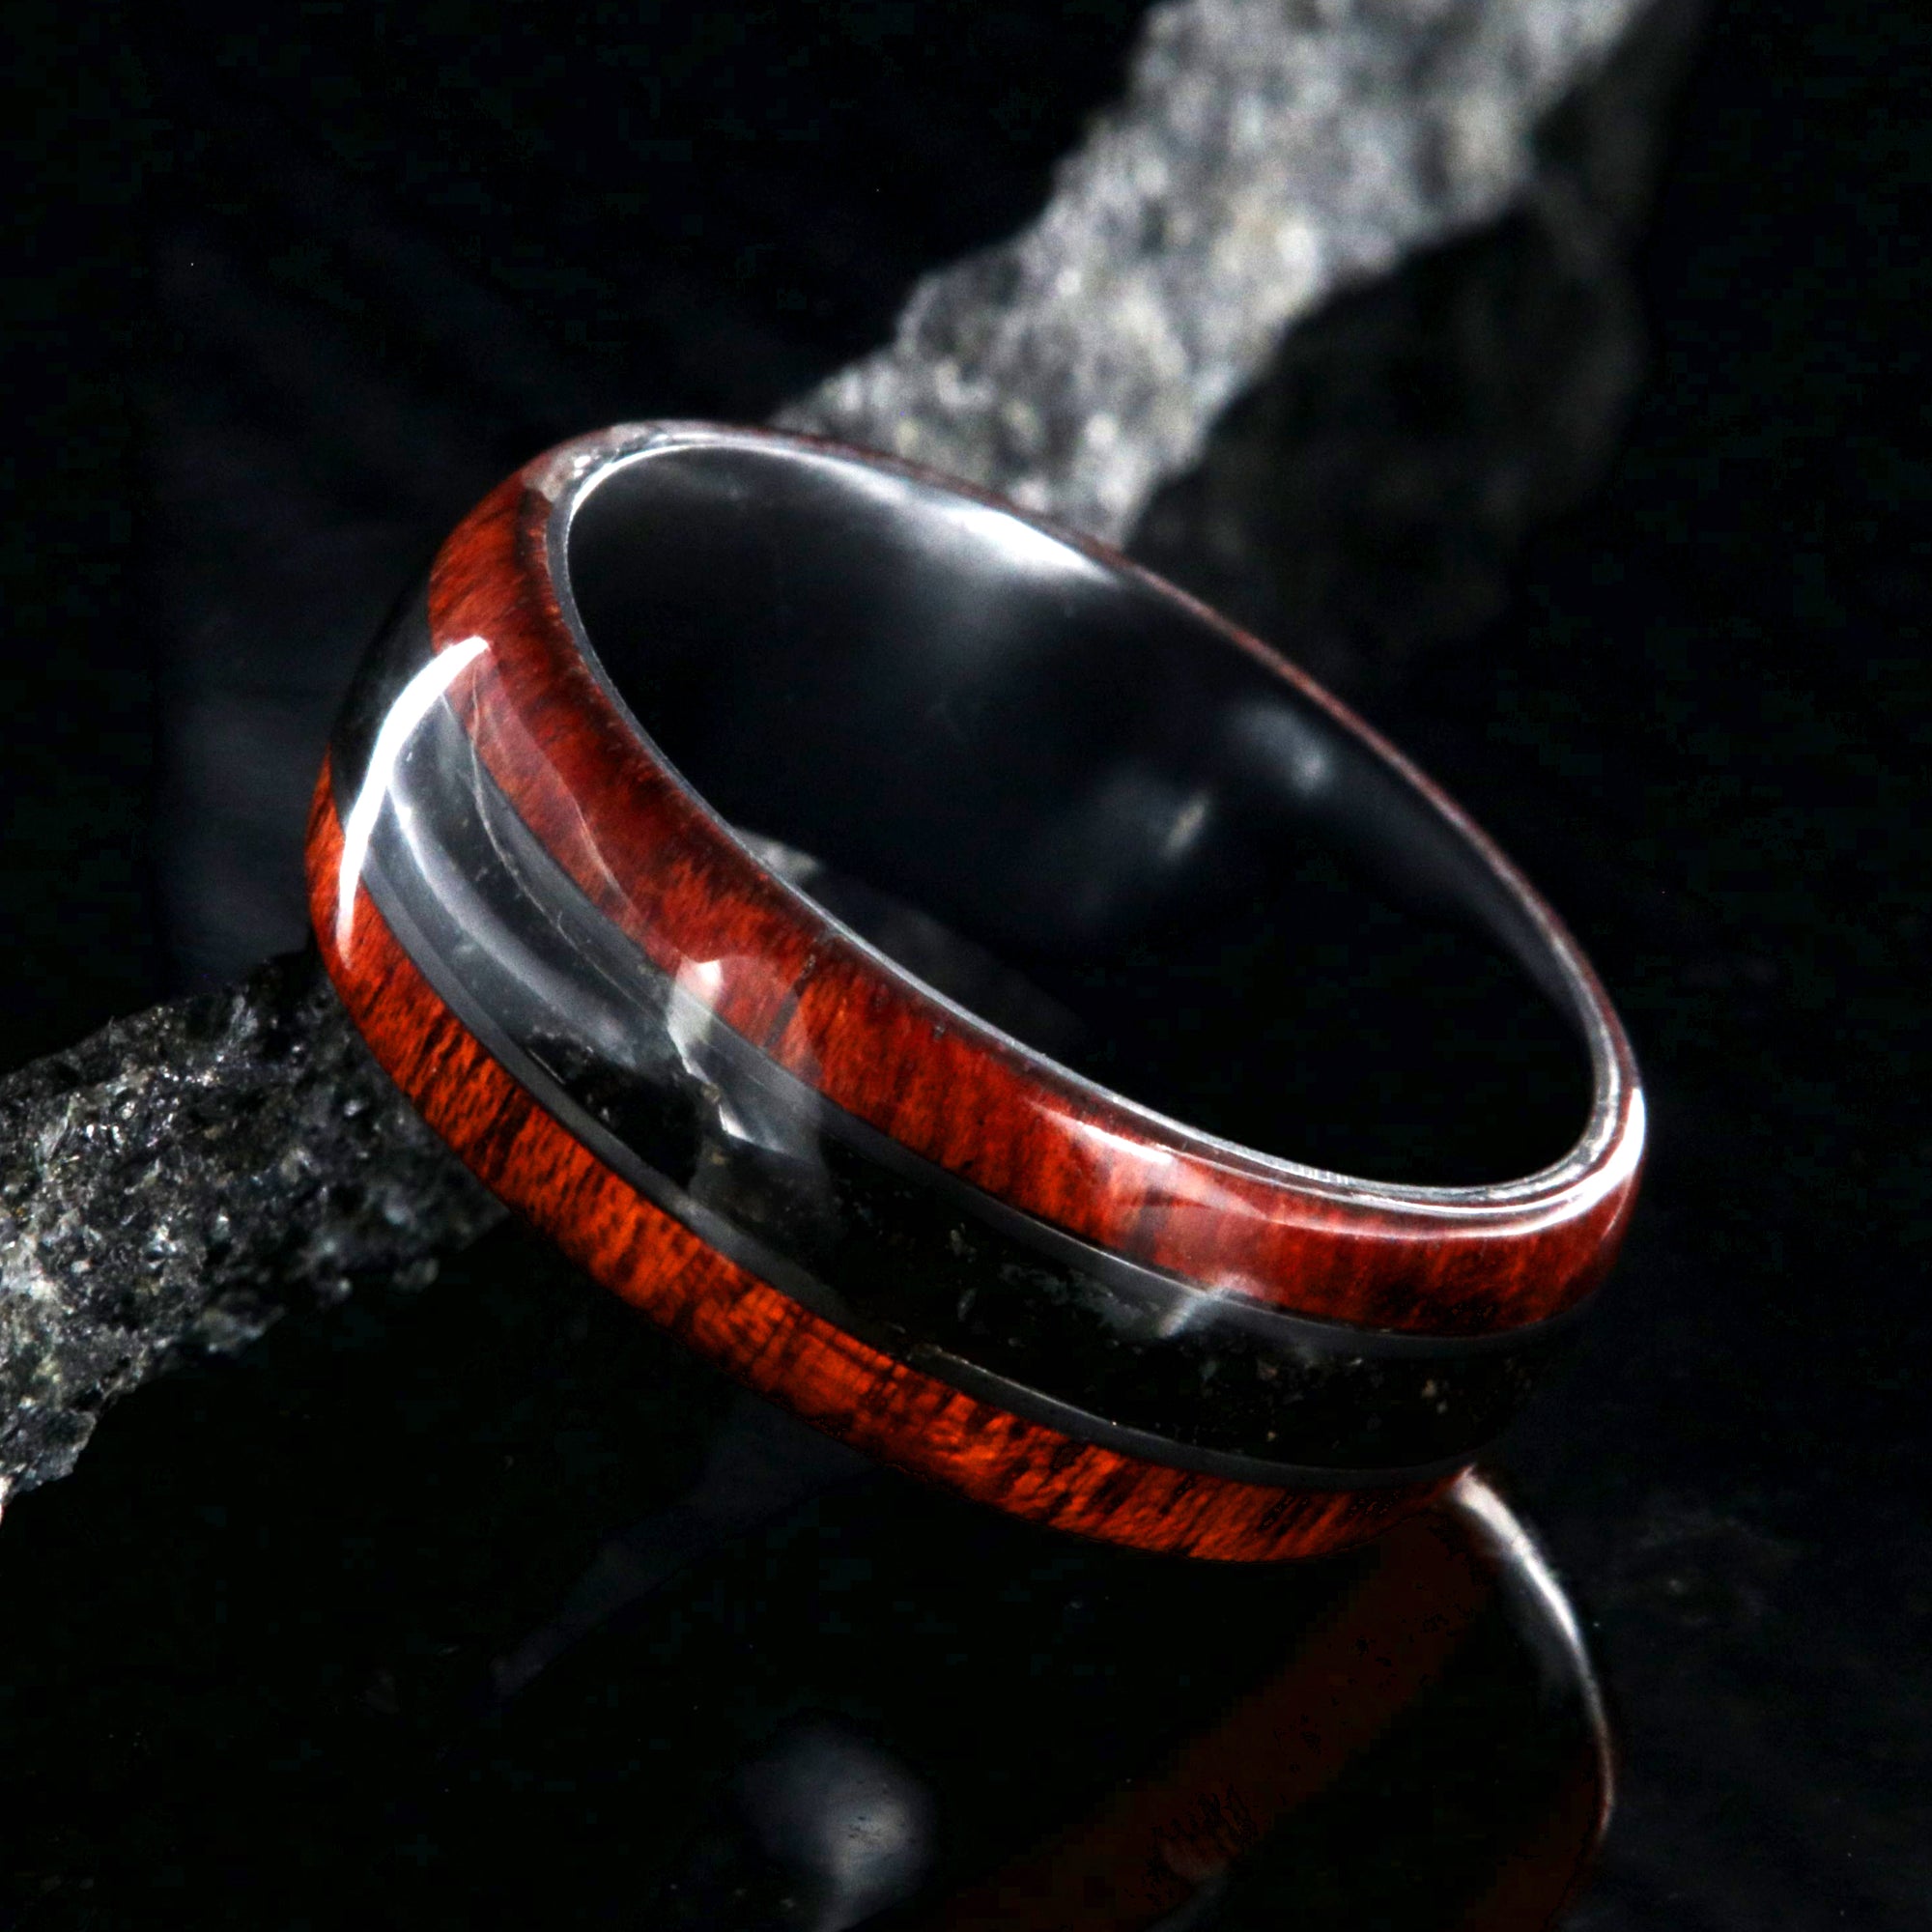 8mm wide wedding band with bloodwood edges with a dark dinosaur bone inlay and a black zirconium sleeve